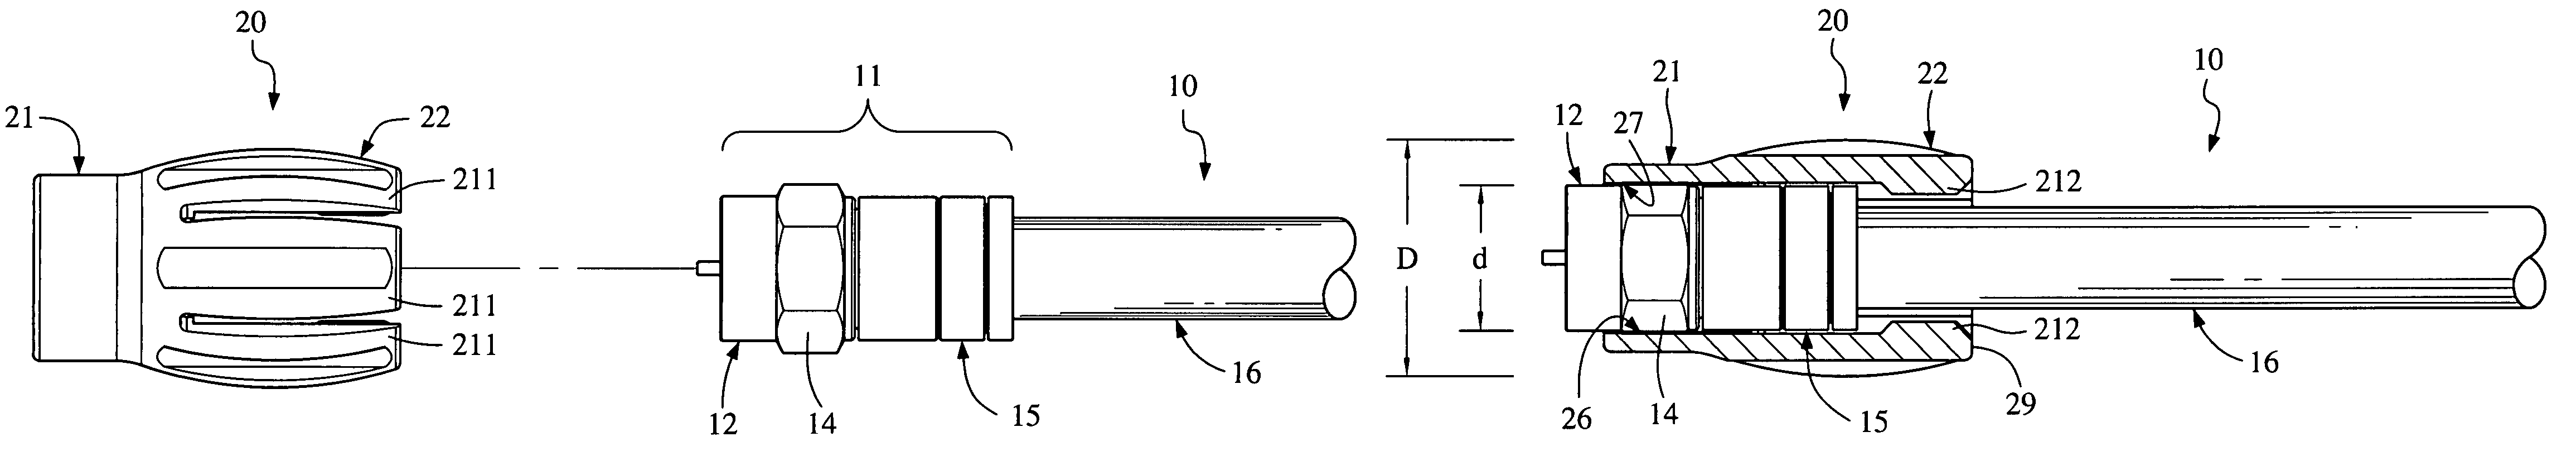 Jumper sleeve for connecting and disconnecting male F connector to and from female F connector